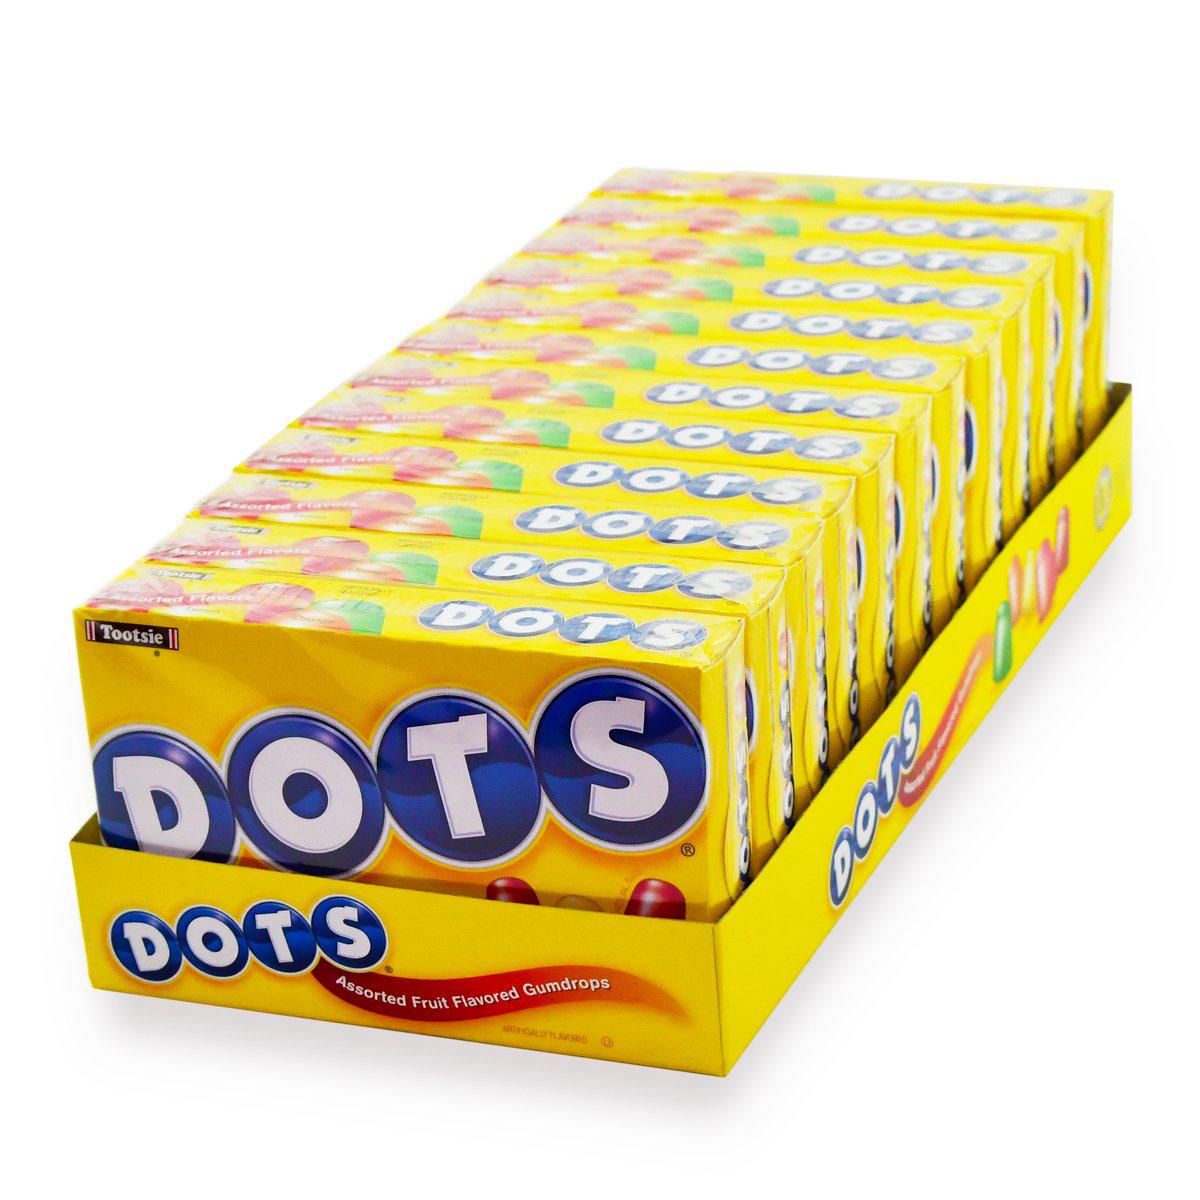 Tootsie-DOTS Original Fruit Flavored Gum Drops 6.5 oz. Theater Box-87000-12-Box of 12-Legacy Toys